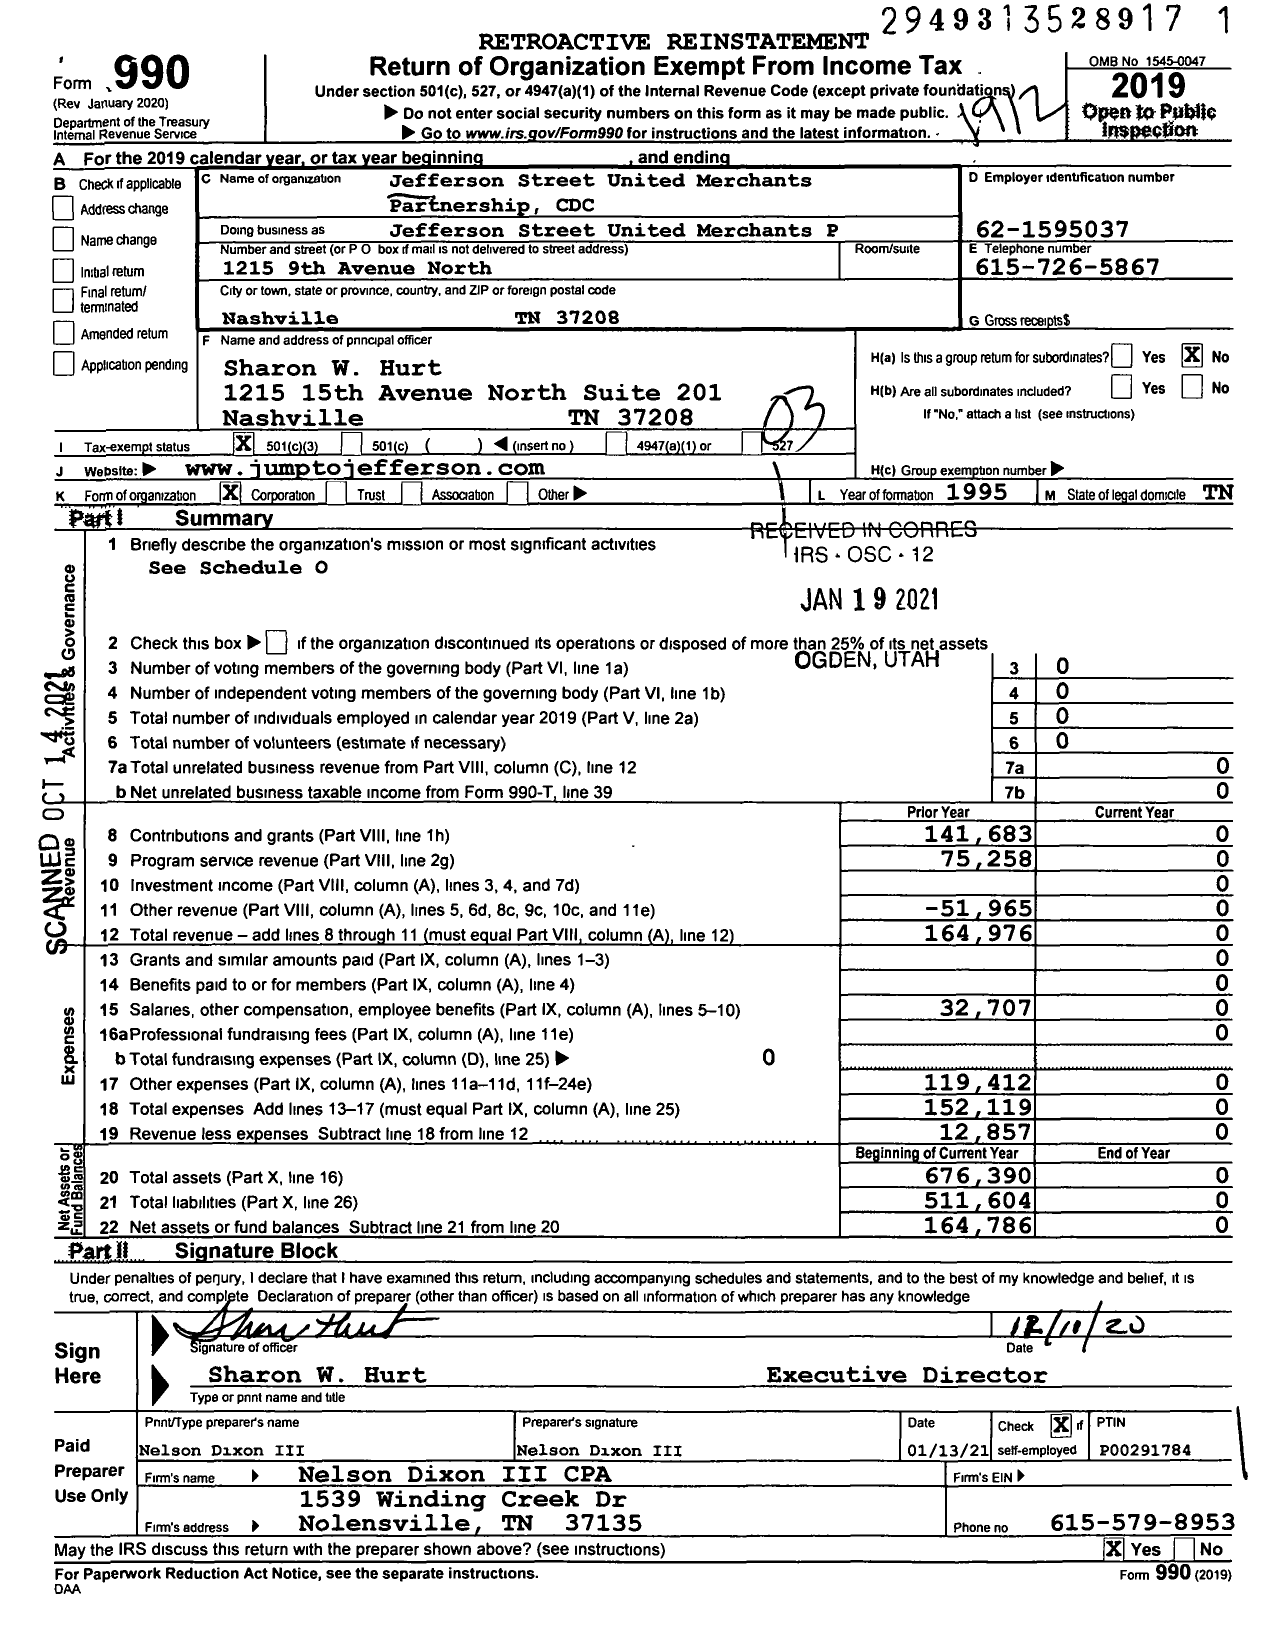 Image of first page of 2019 Form 990 for Jefferson Street United Merchants Partnership